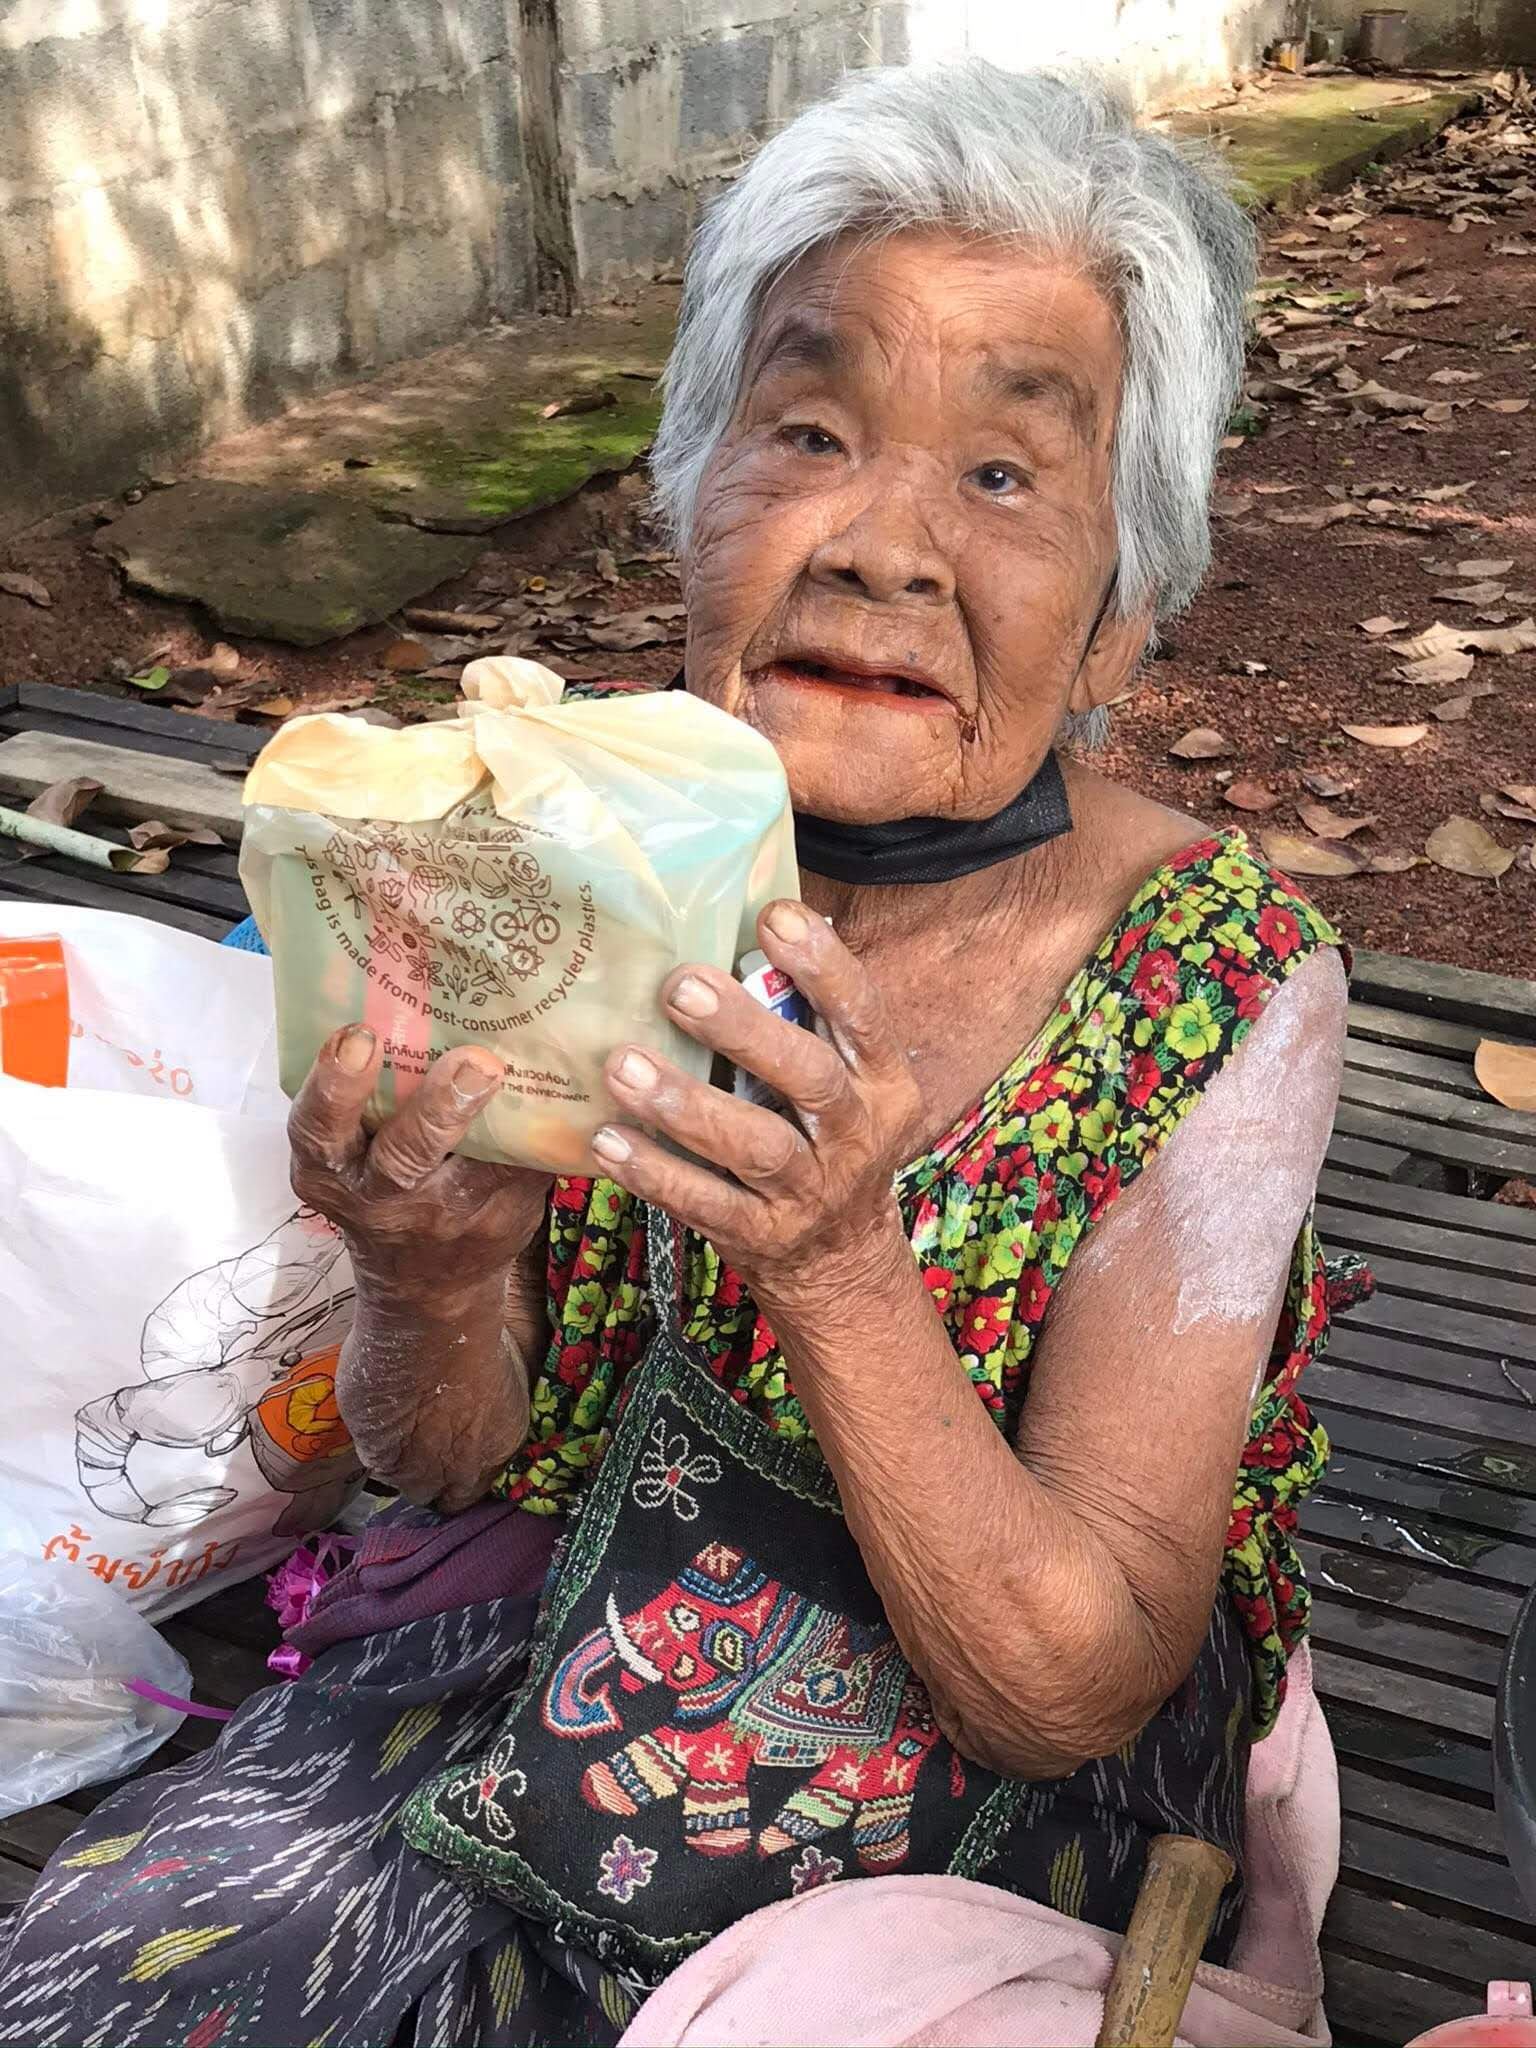 Thai eler woman Yaai Charlie holding up food for the camera